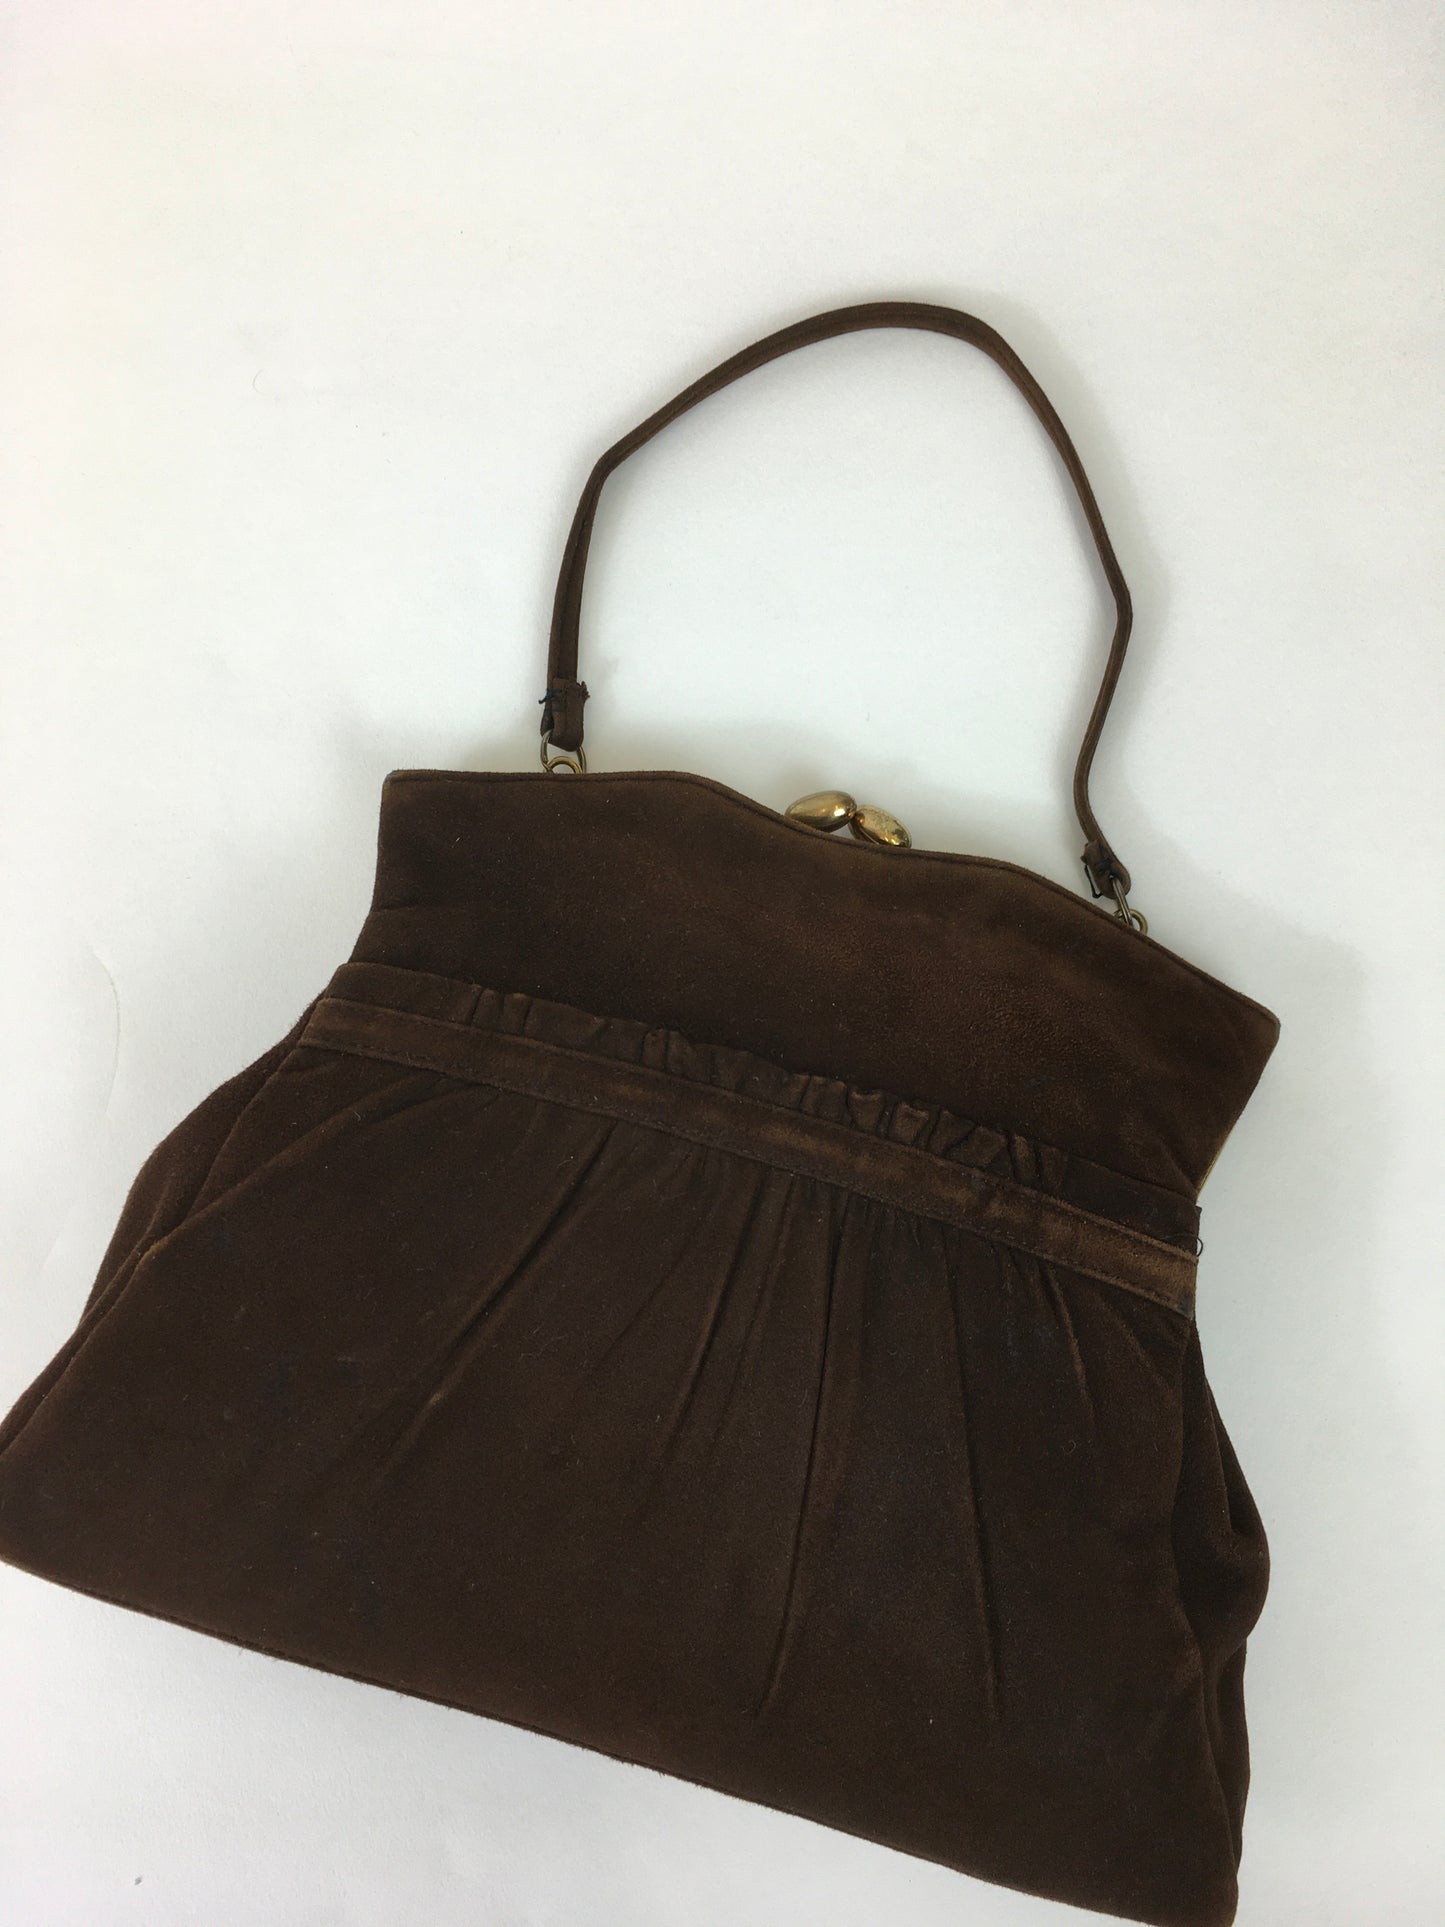 Original 1930s Darling Suede Handbag In Brown - Pleated Detailing To The Front